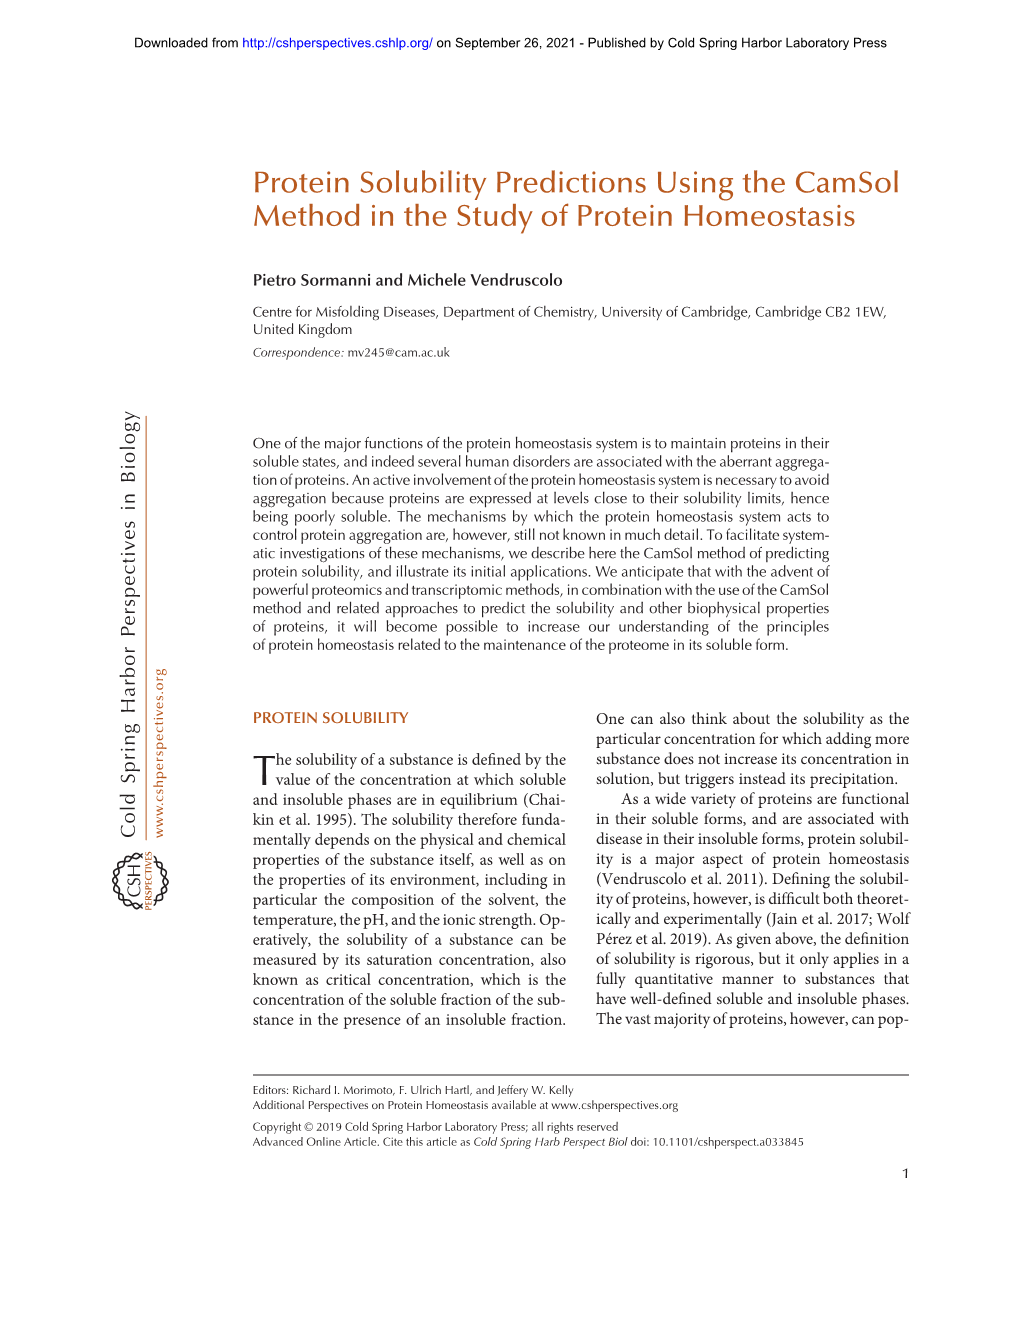 Protein Solubility Predictions Using the Camsol Method in the Study of Protein Homeostasis